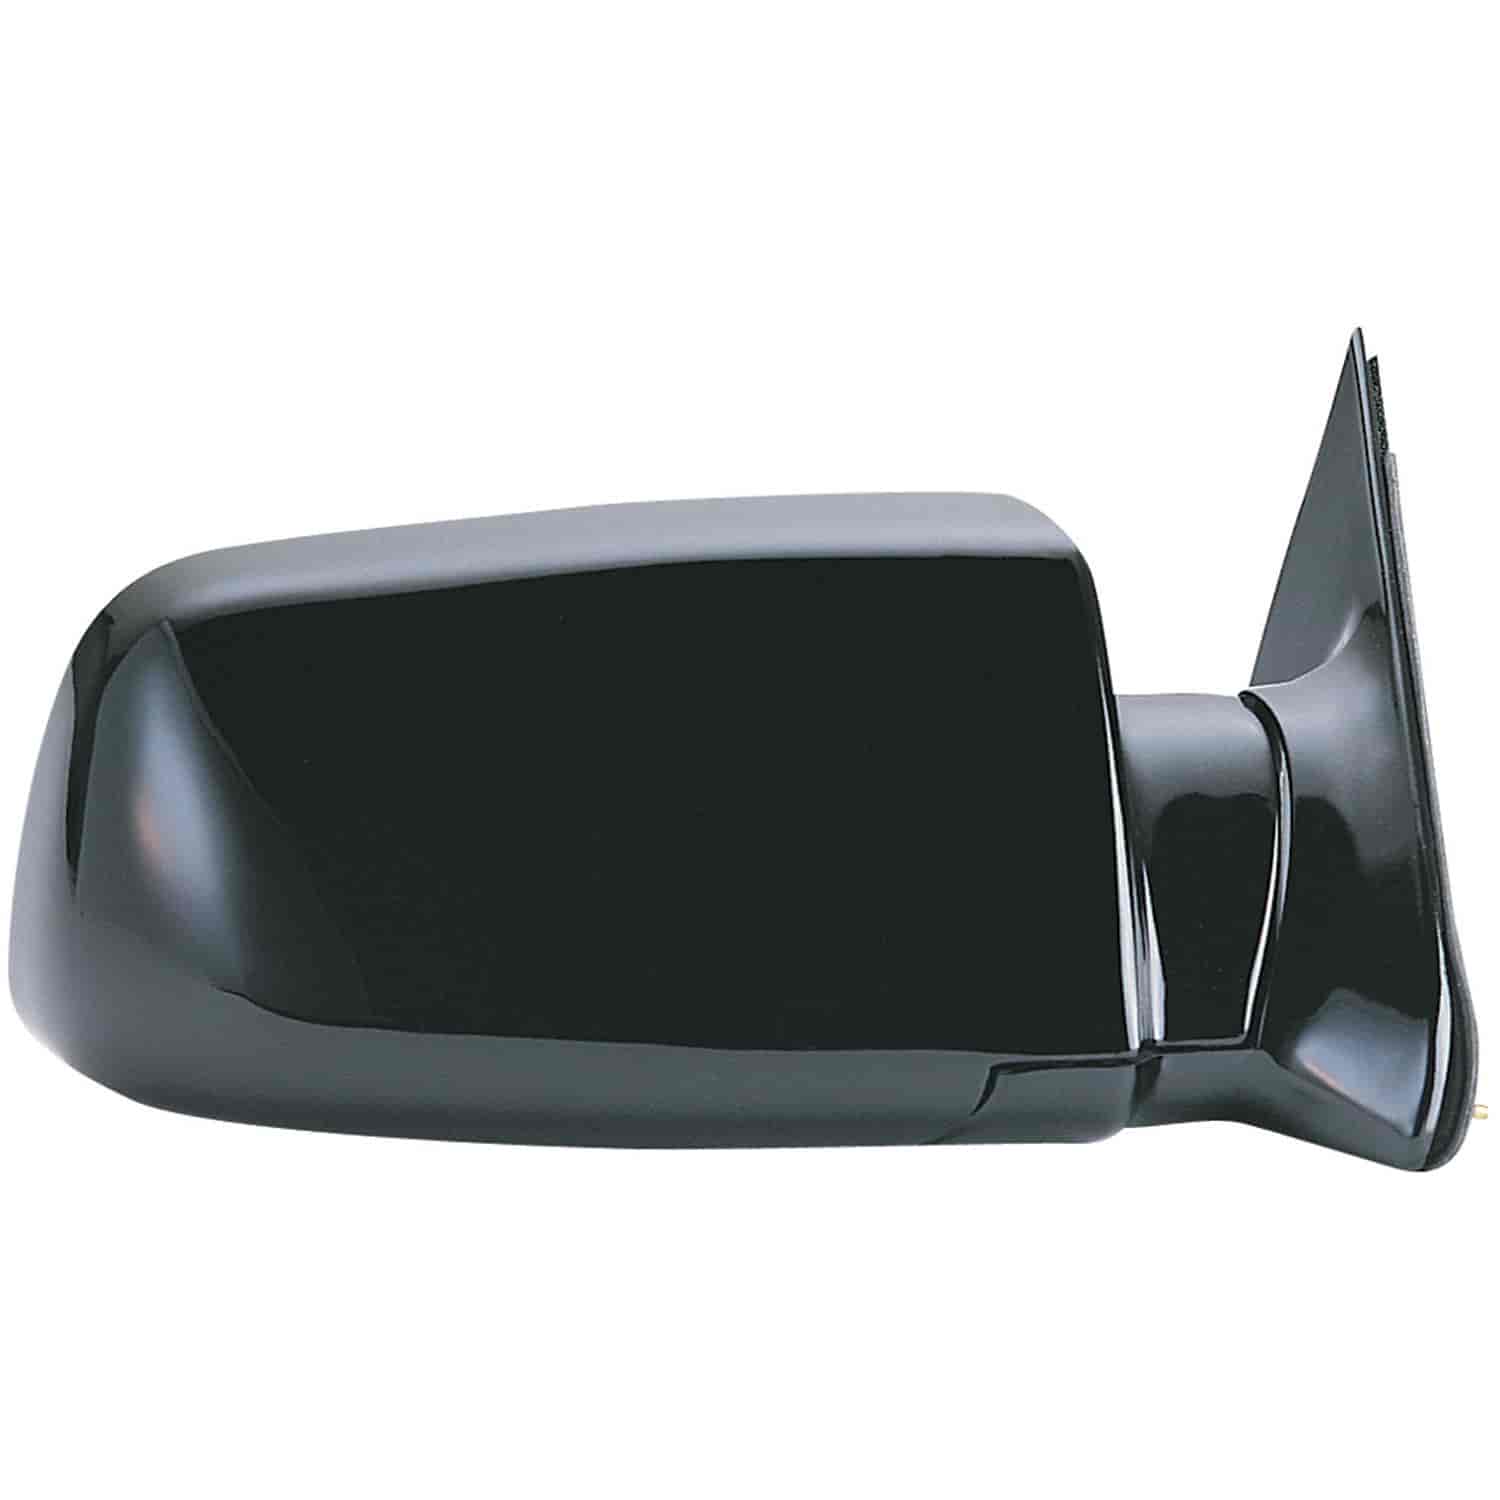 OEM Style Replacement Mirror Fits 1992 to 2000 Chevy Blazer/Tahoe